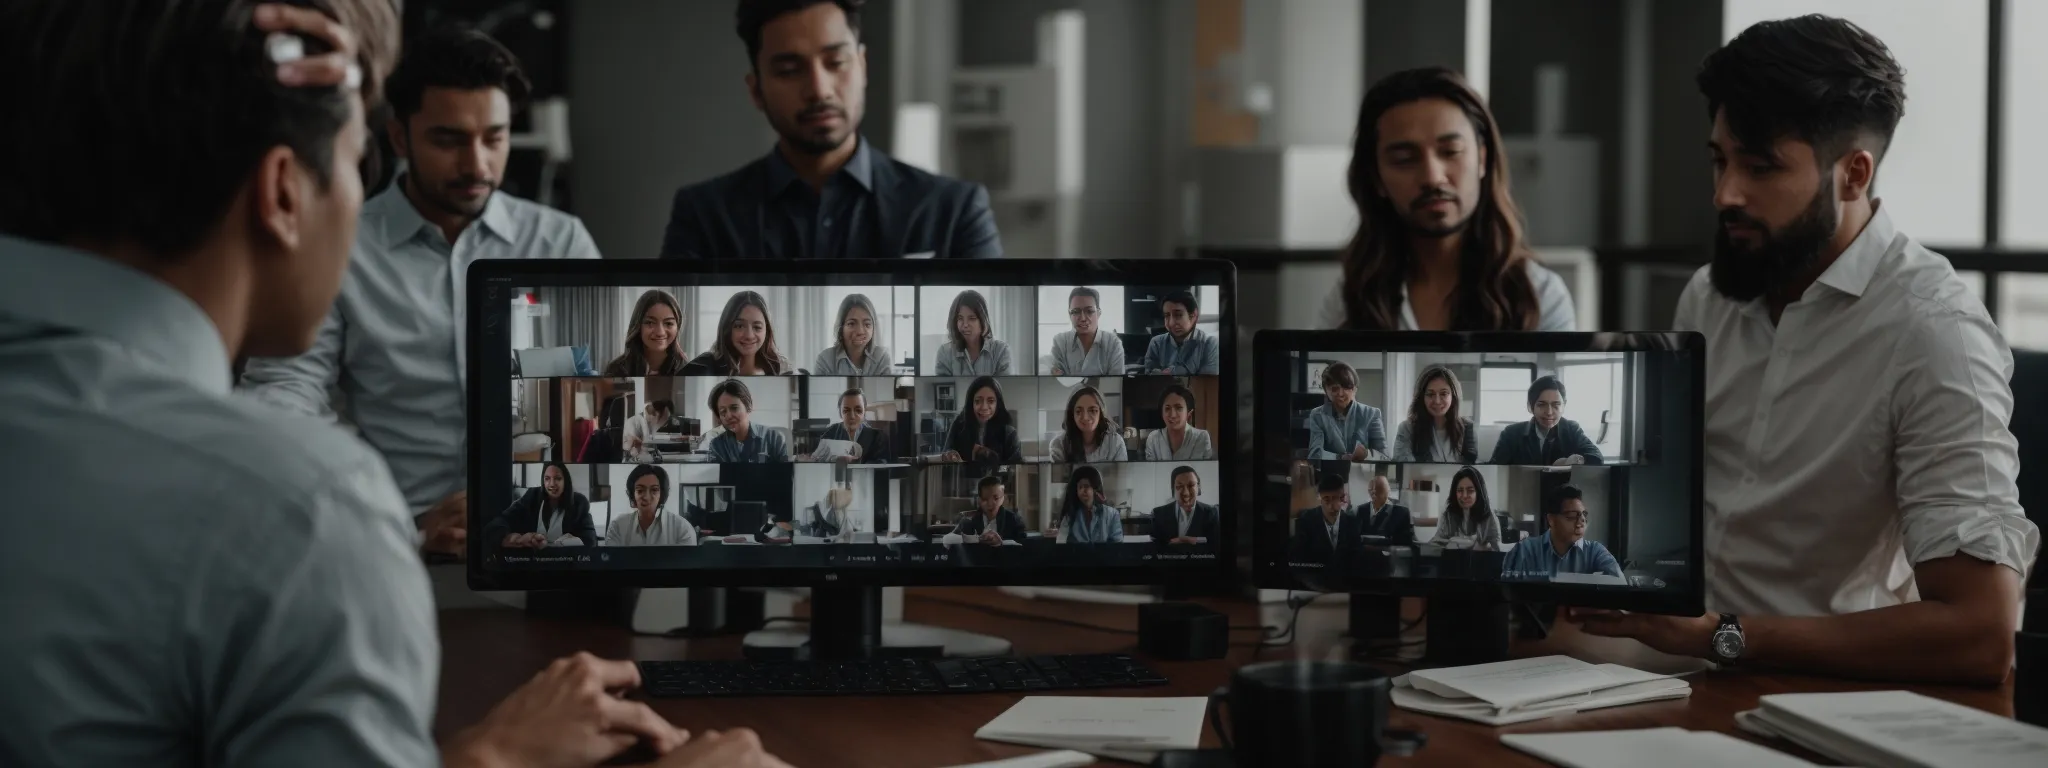 a team video conference with shared digital documents on the screen, symbolizing collaborative remote work through hr software.